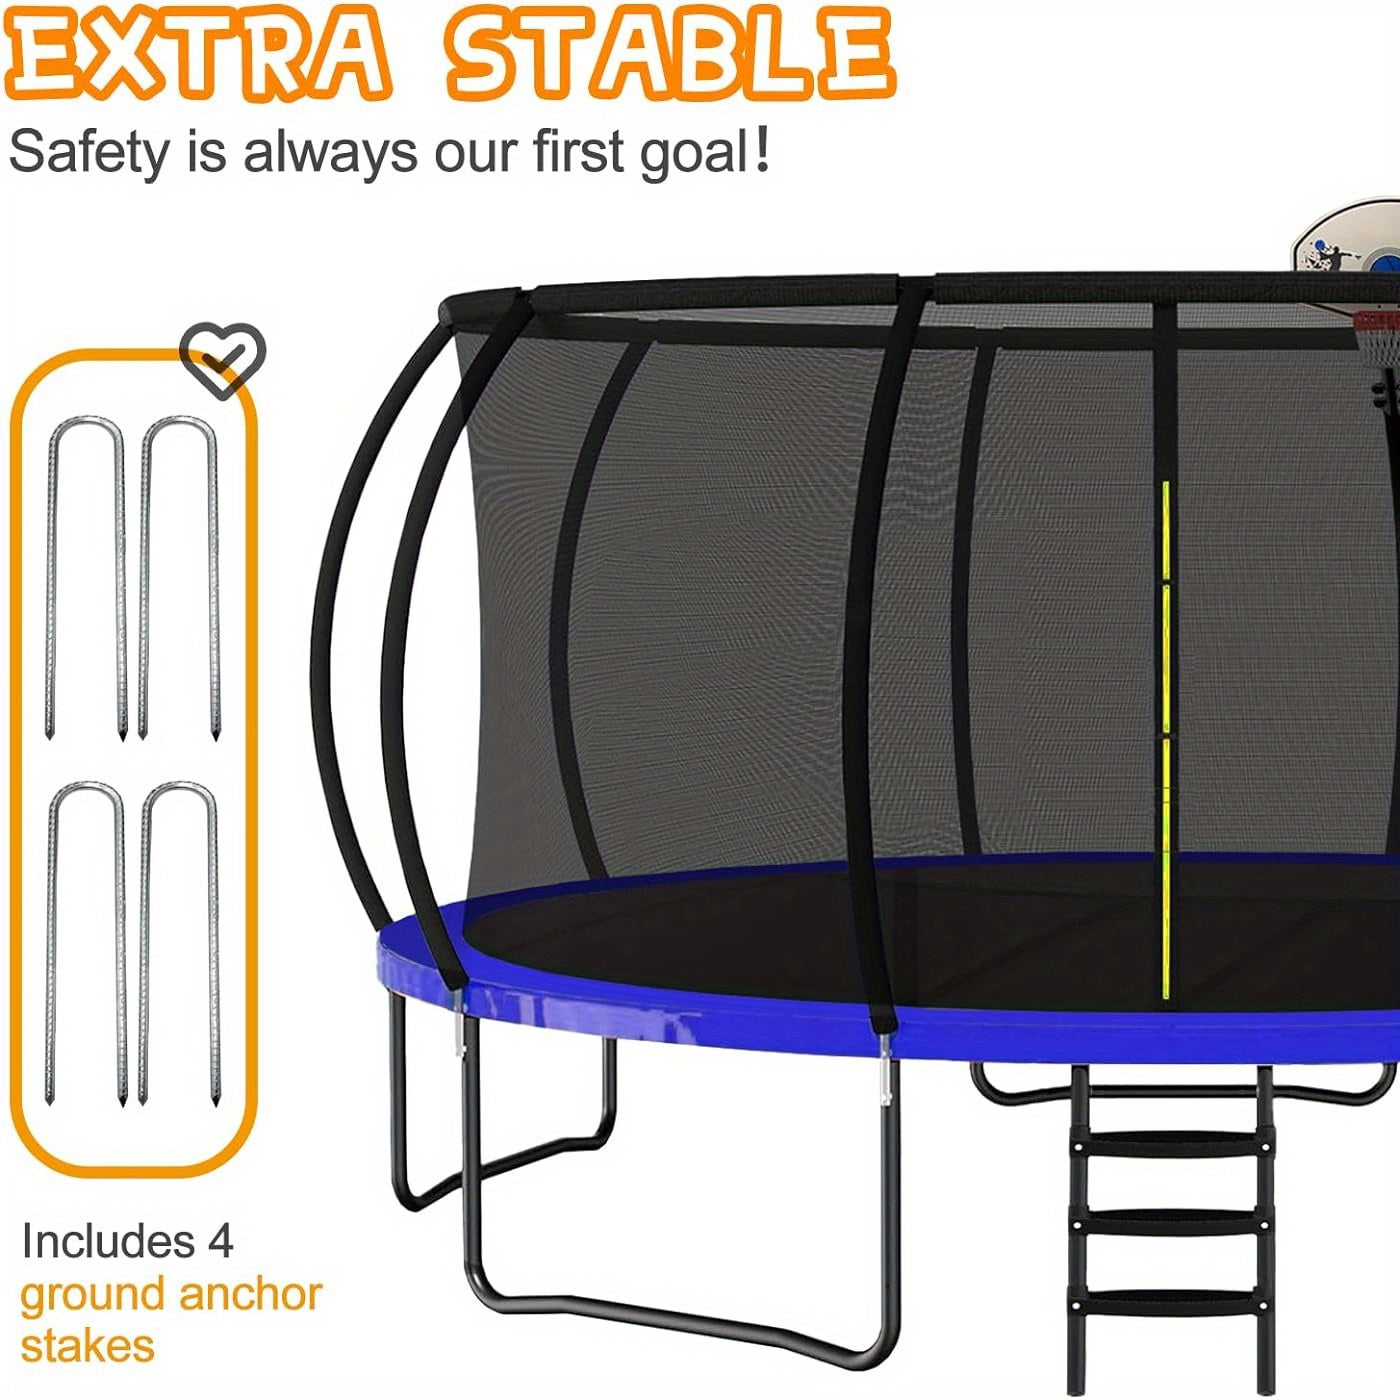 Trampoline 16FT, 12FT, 10FT, Recreational Trampolines with Enclosure Net and Ladder, Outdoor Anti-Rust Trampolines for Kids and Adults, ASTM Approved, Trampoline Outdoor with Basketball Hoop, Ladder, Rebounder Trampoline for Kids Adults with Enclosure Net